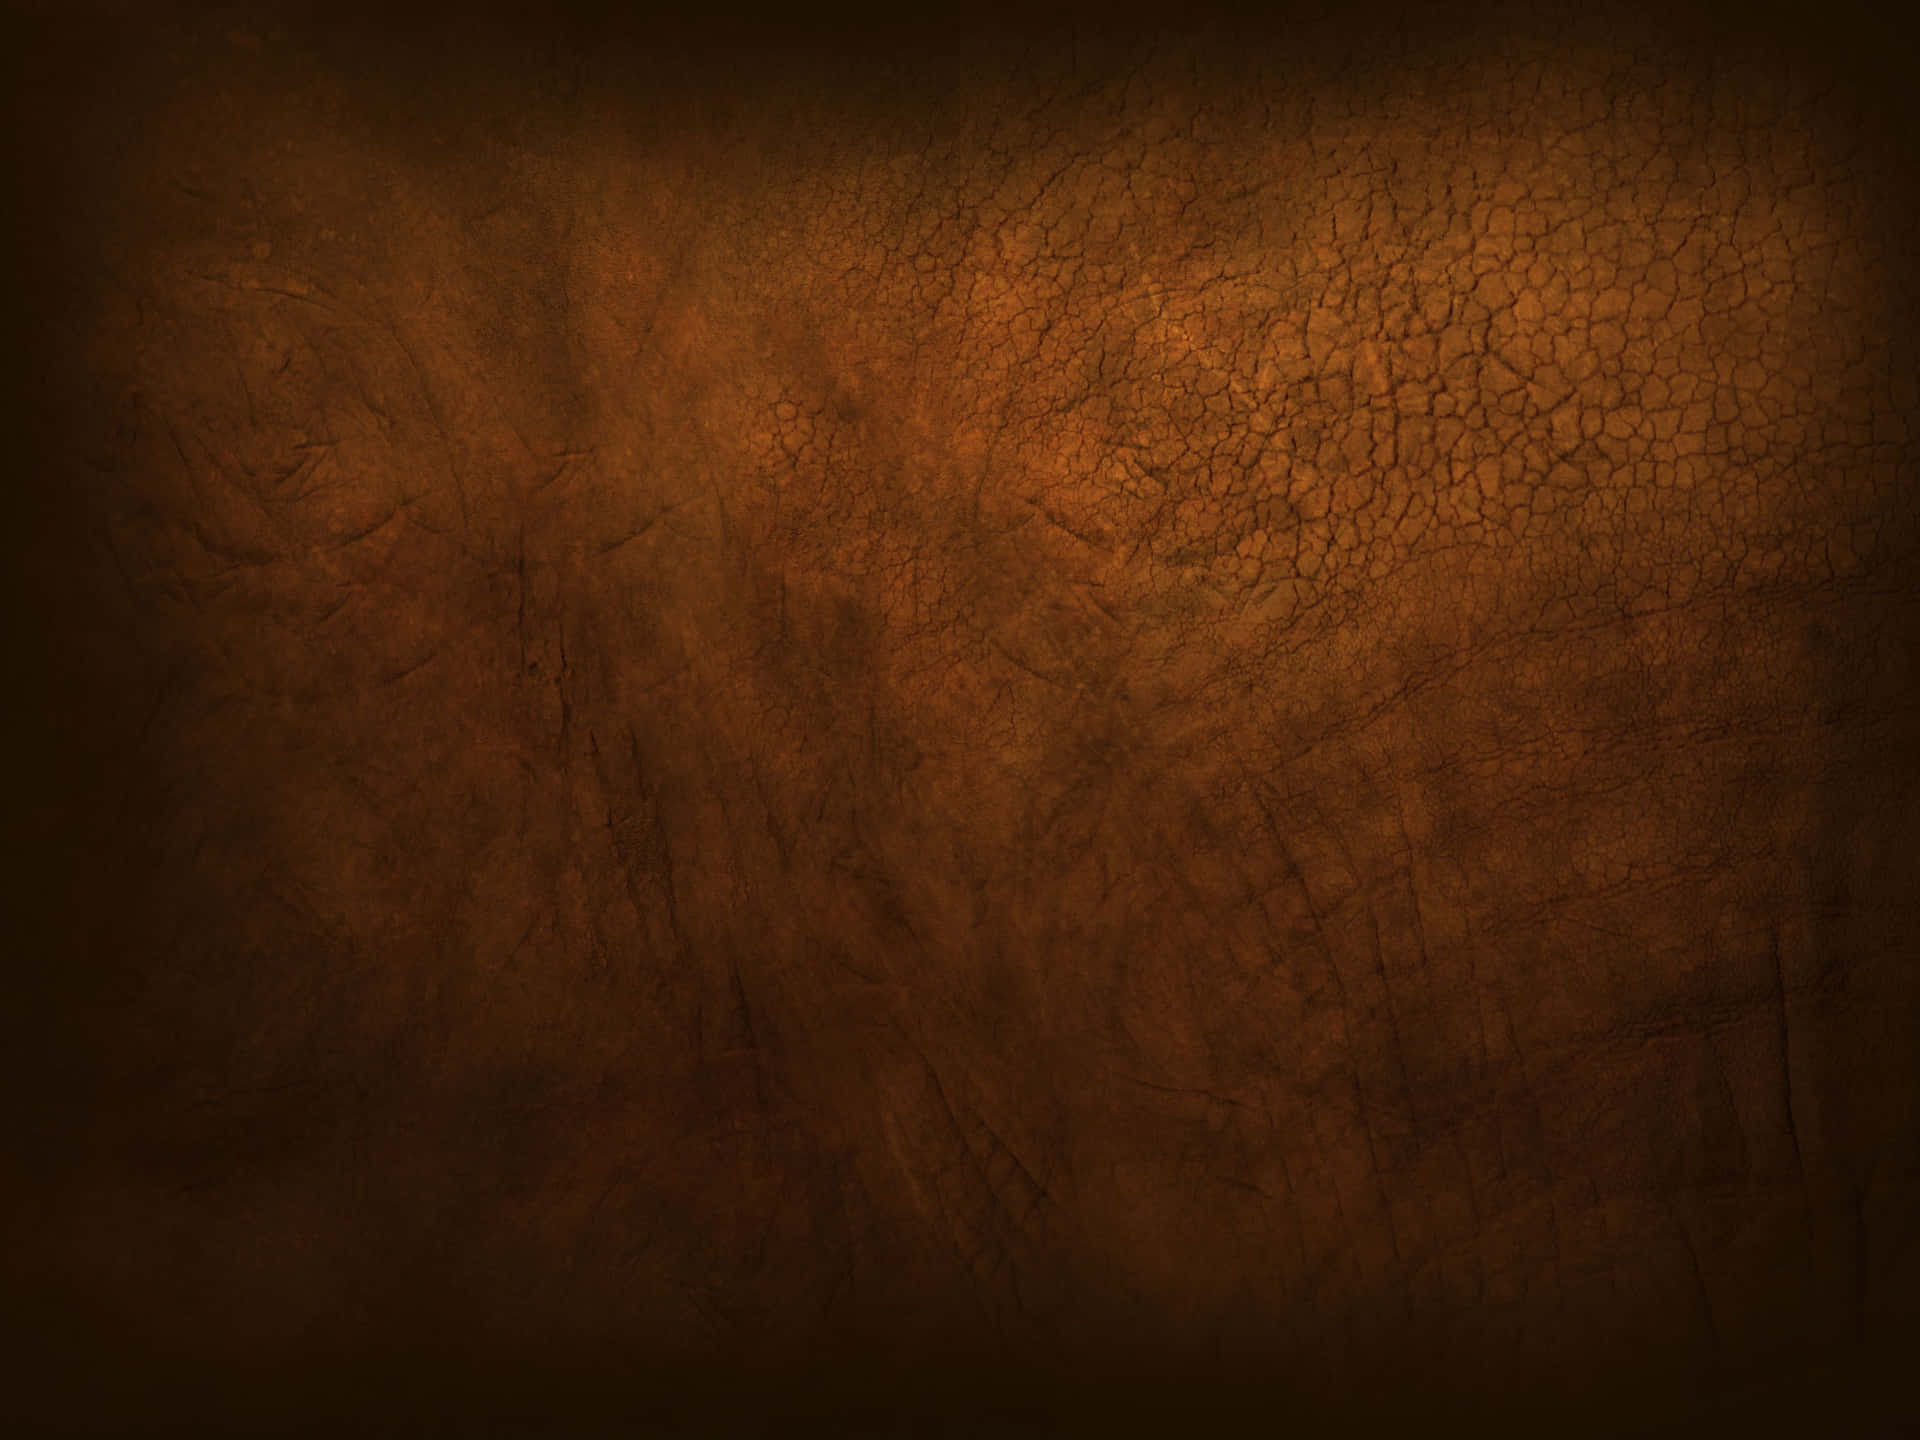 A Brown Leather Background With Dark Spots